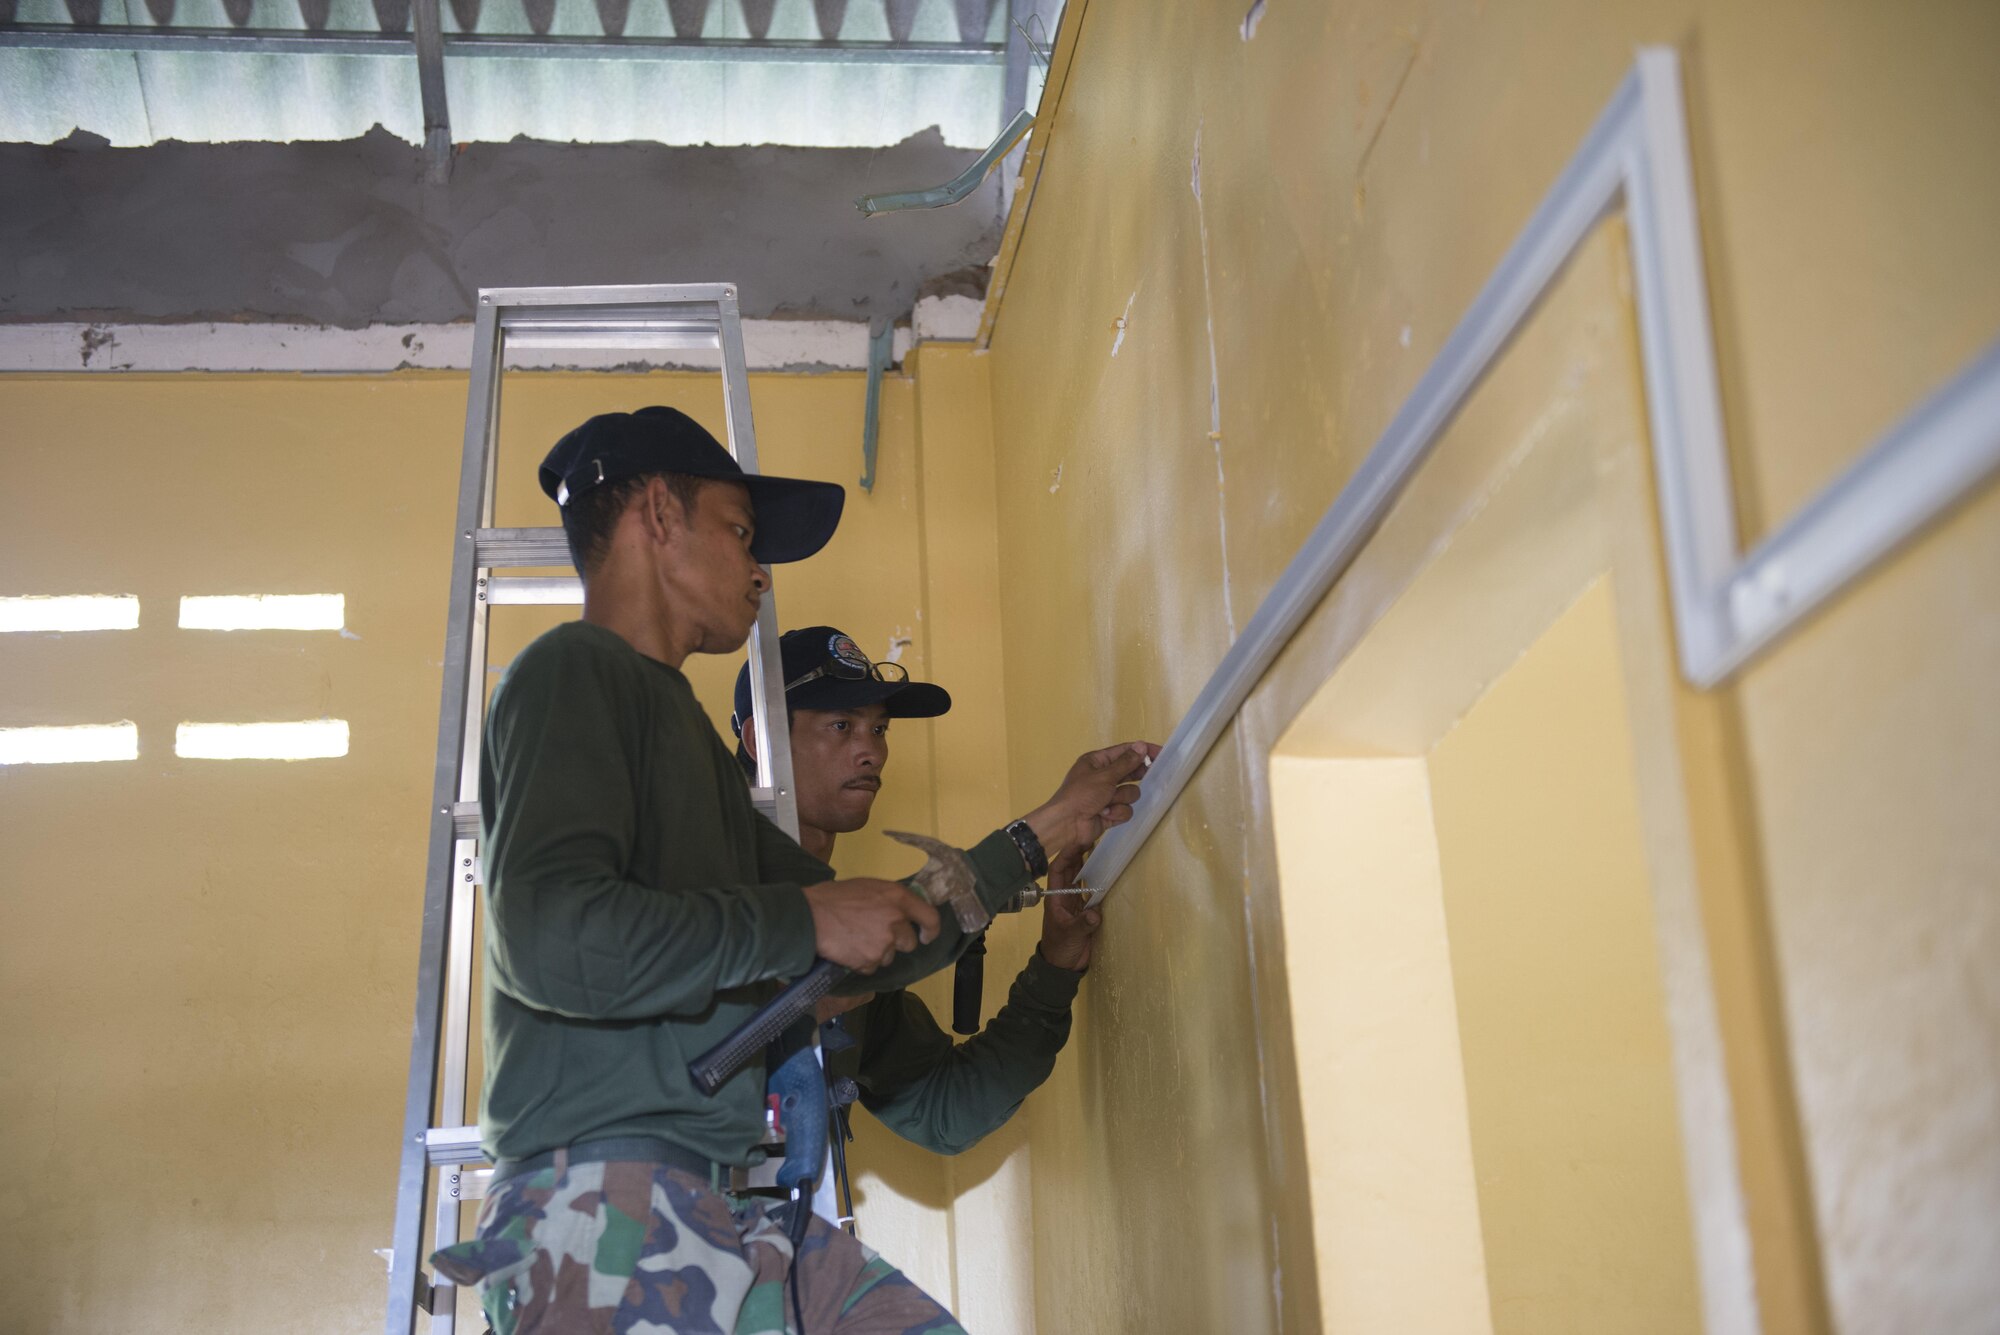 Cambodian Armed Forces Sgt. Nget Sytha and Sgt. Ngin Samnang, Royal Cambodian engineers fit the wall of a health center for electrical cables during Pacific Angel 16-2, June 16, 2016, in Kampot Province, Cambodia. Pacific Angel is a humanitarian assistance/civil military operation missions that builds partner capacity through medical/health outreach, engineering civic projects and subject matter exchanges. (U.S. Air Force photo by Senior Airman Omari Bernard/Released)